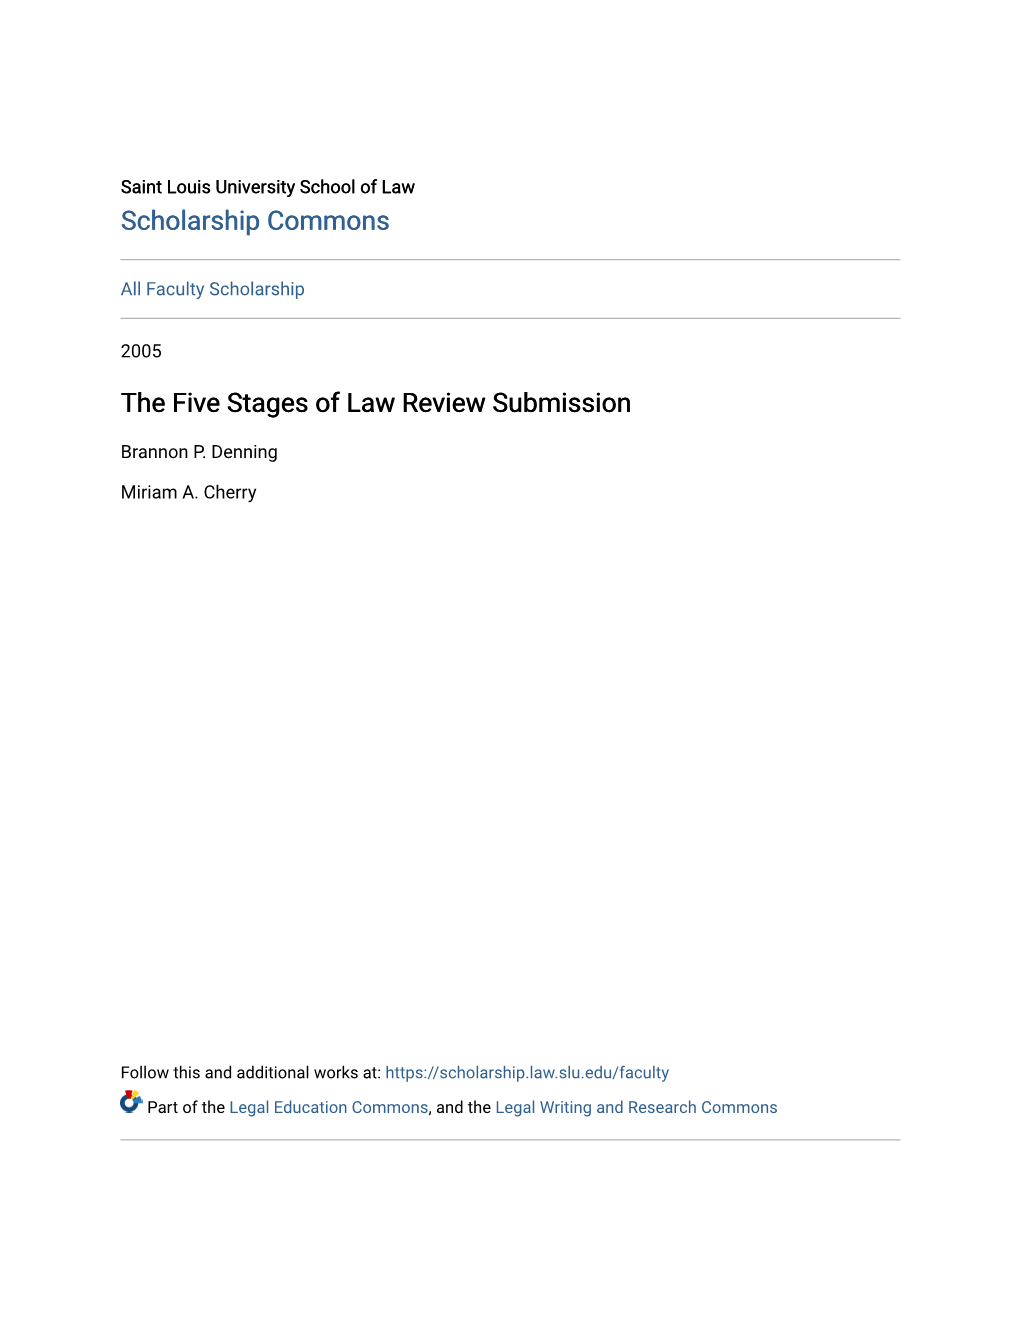 The Five Stages of Law Review Submission